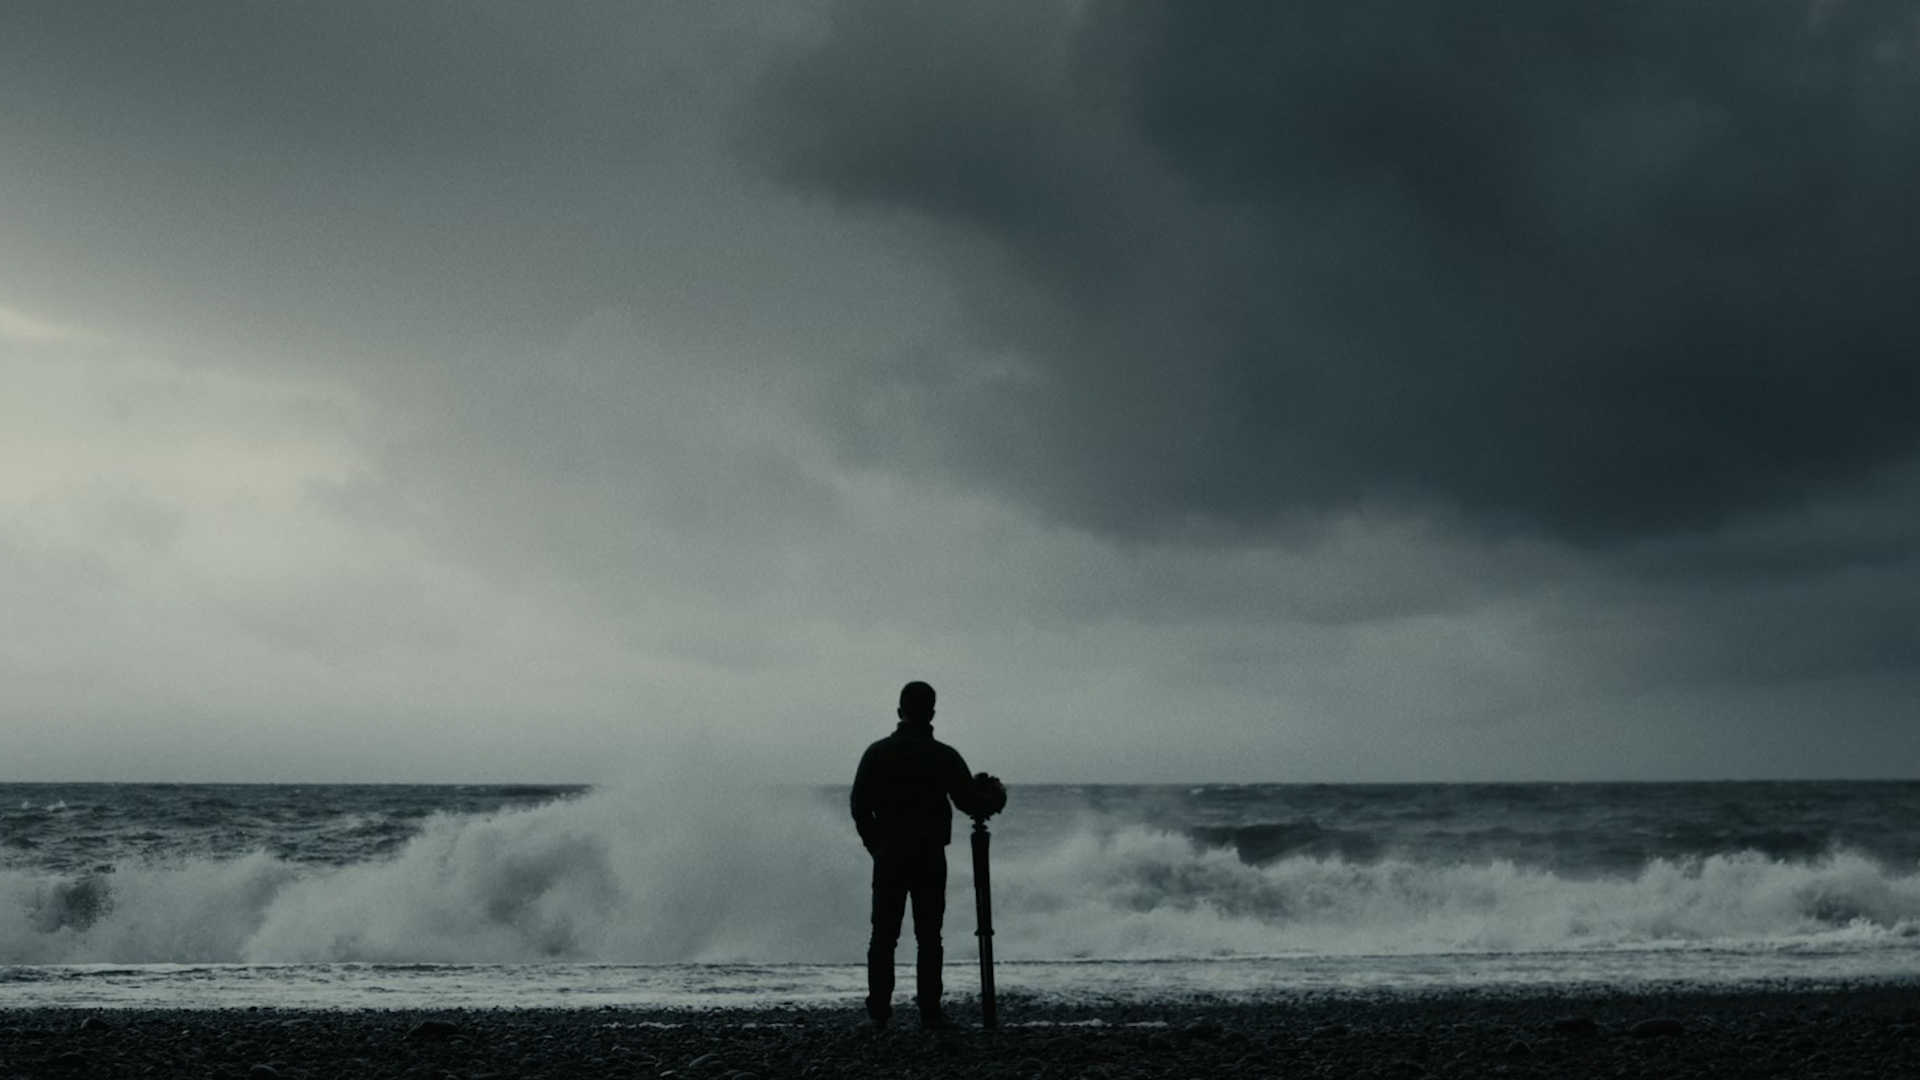 A silhouette of a man with a tripod-mounted camera standing in front of a dark and stormy sea.